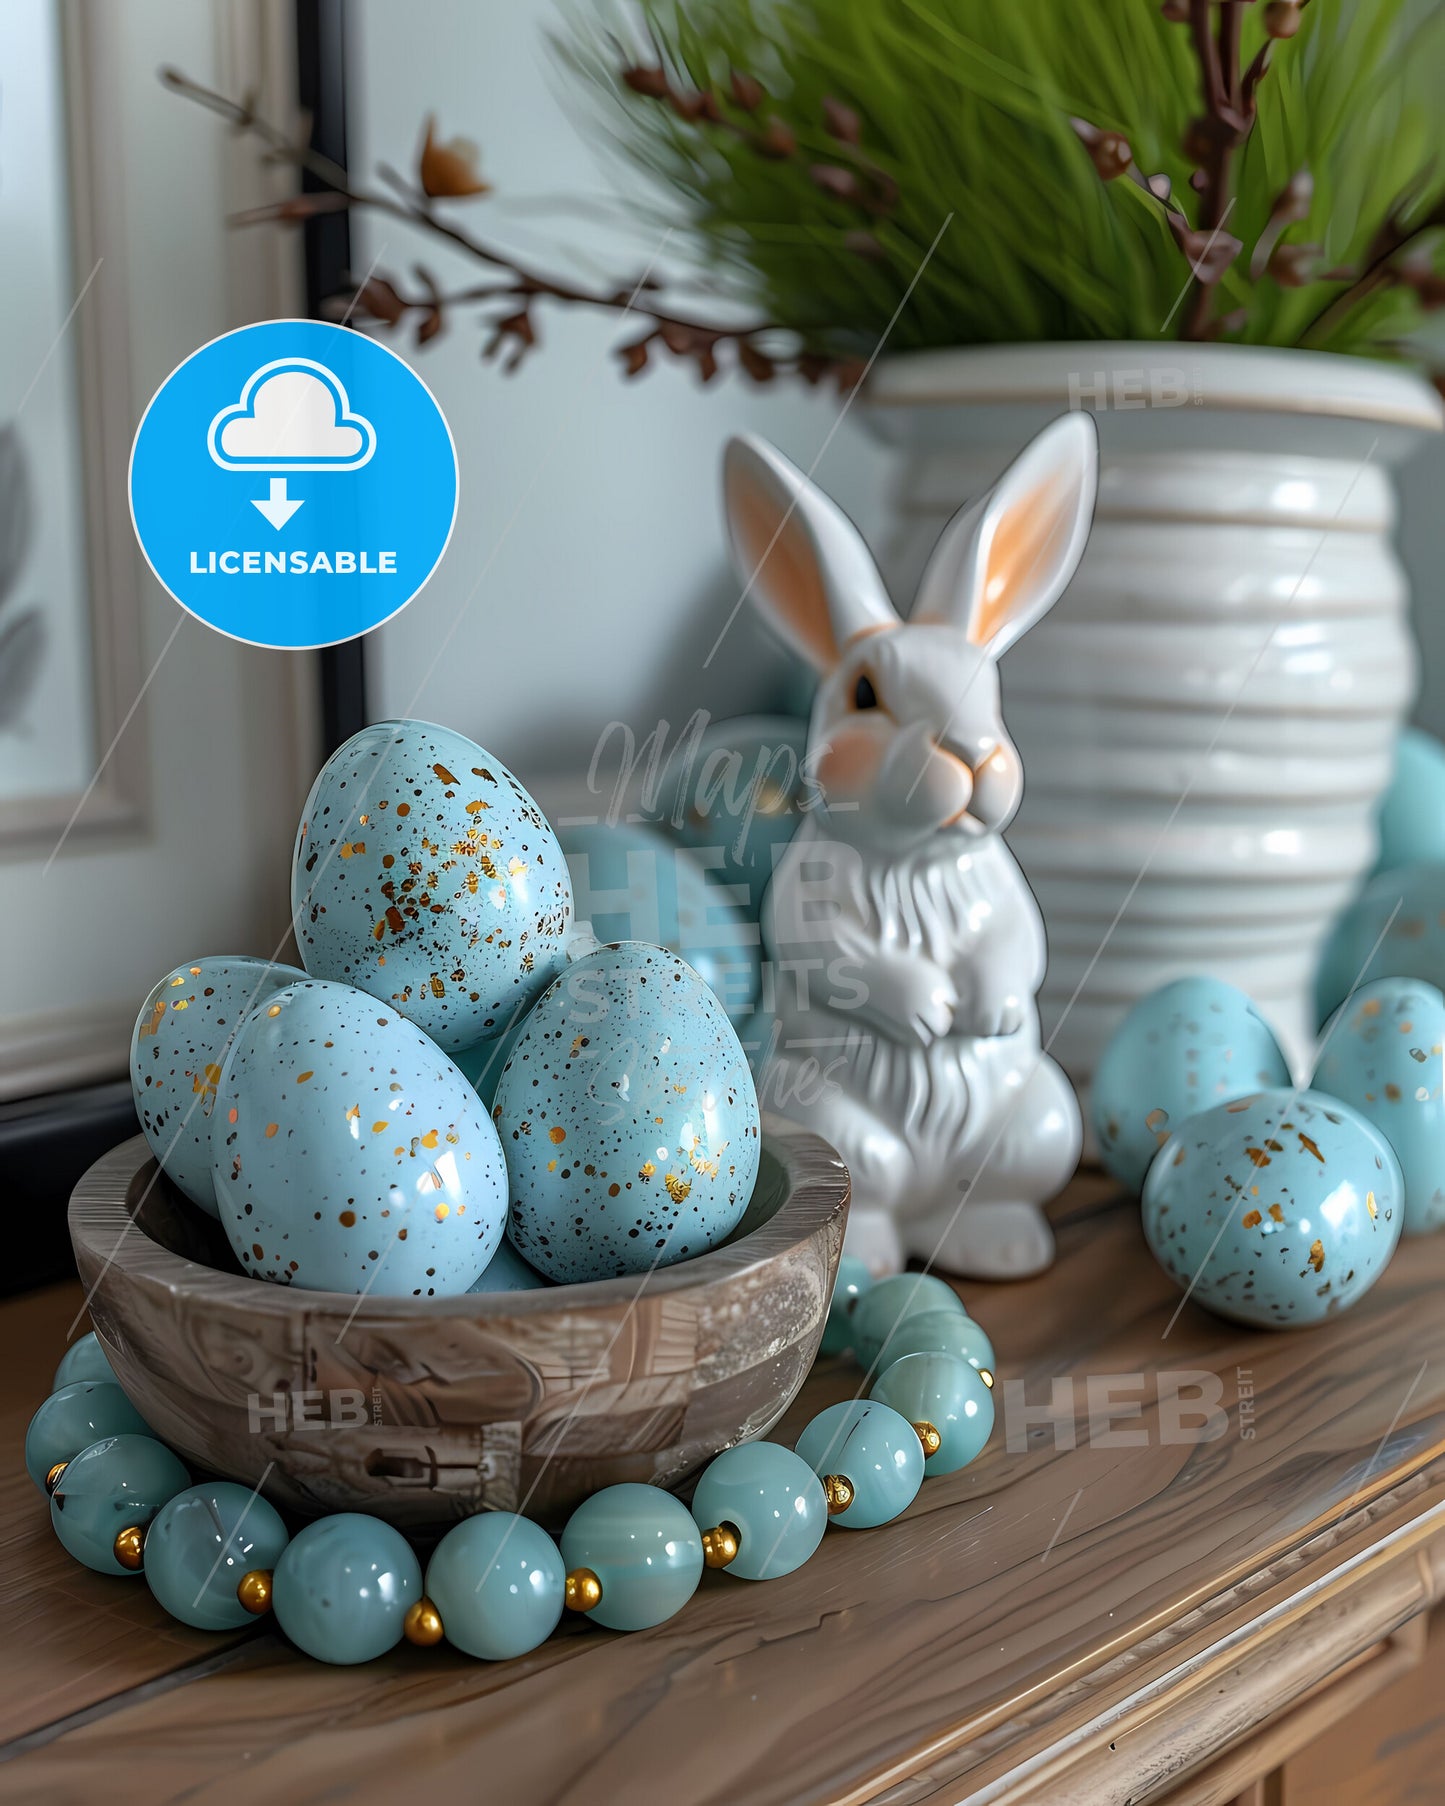 Charming Pastel Easter Decor with Pastel Bangle, Blue Eggs, and Bunny Figurines on Artistic Background